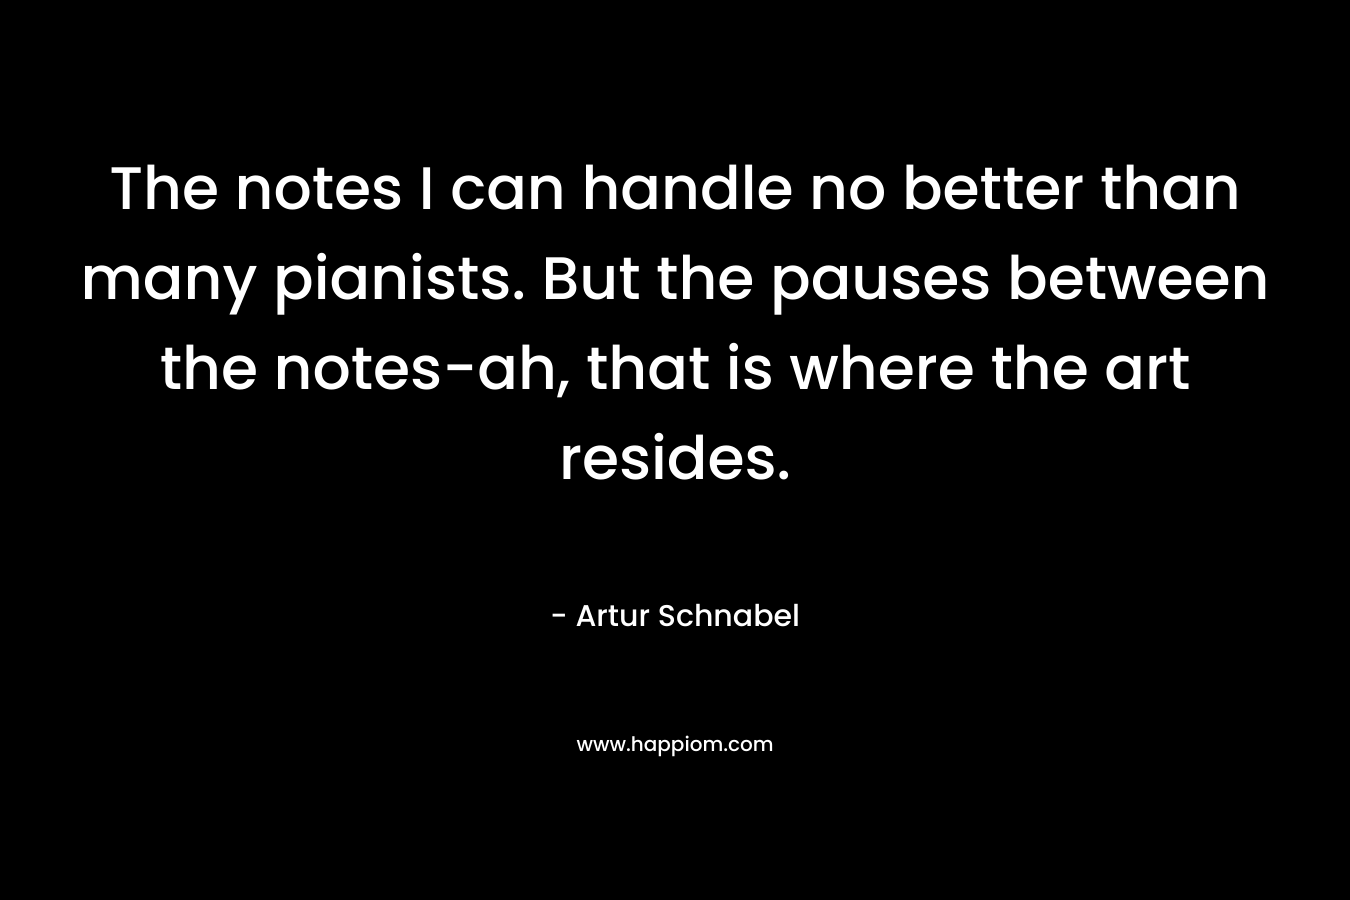 The notes I can handle no better than many pianists. But the pauses between the notes-ah, that is where the art resides.